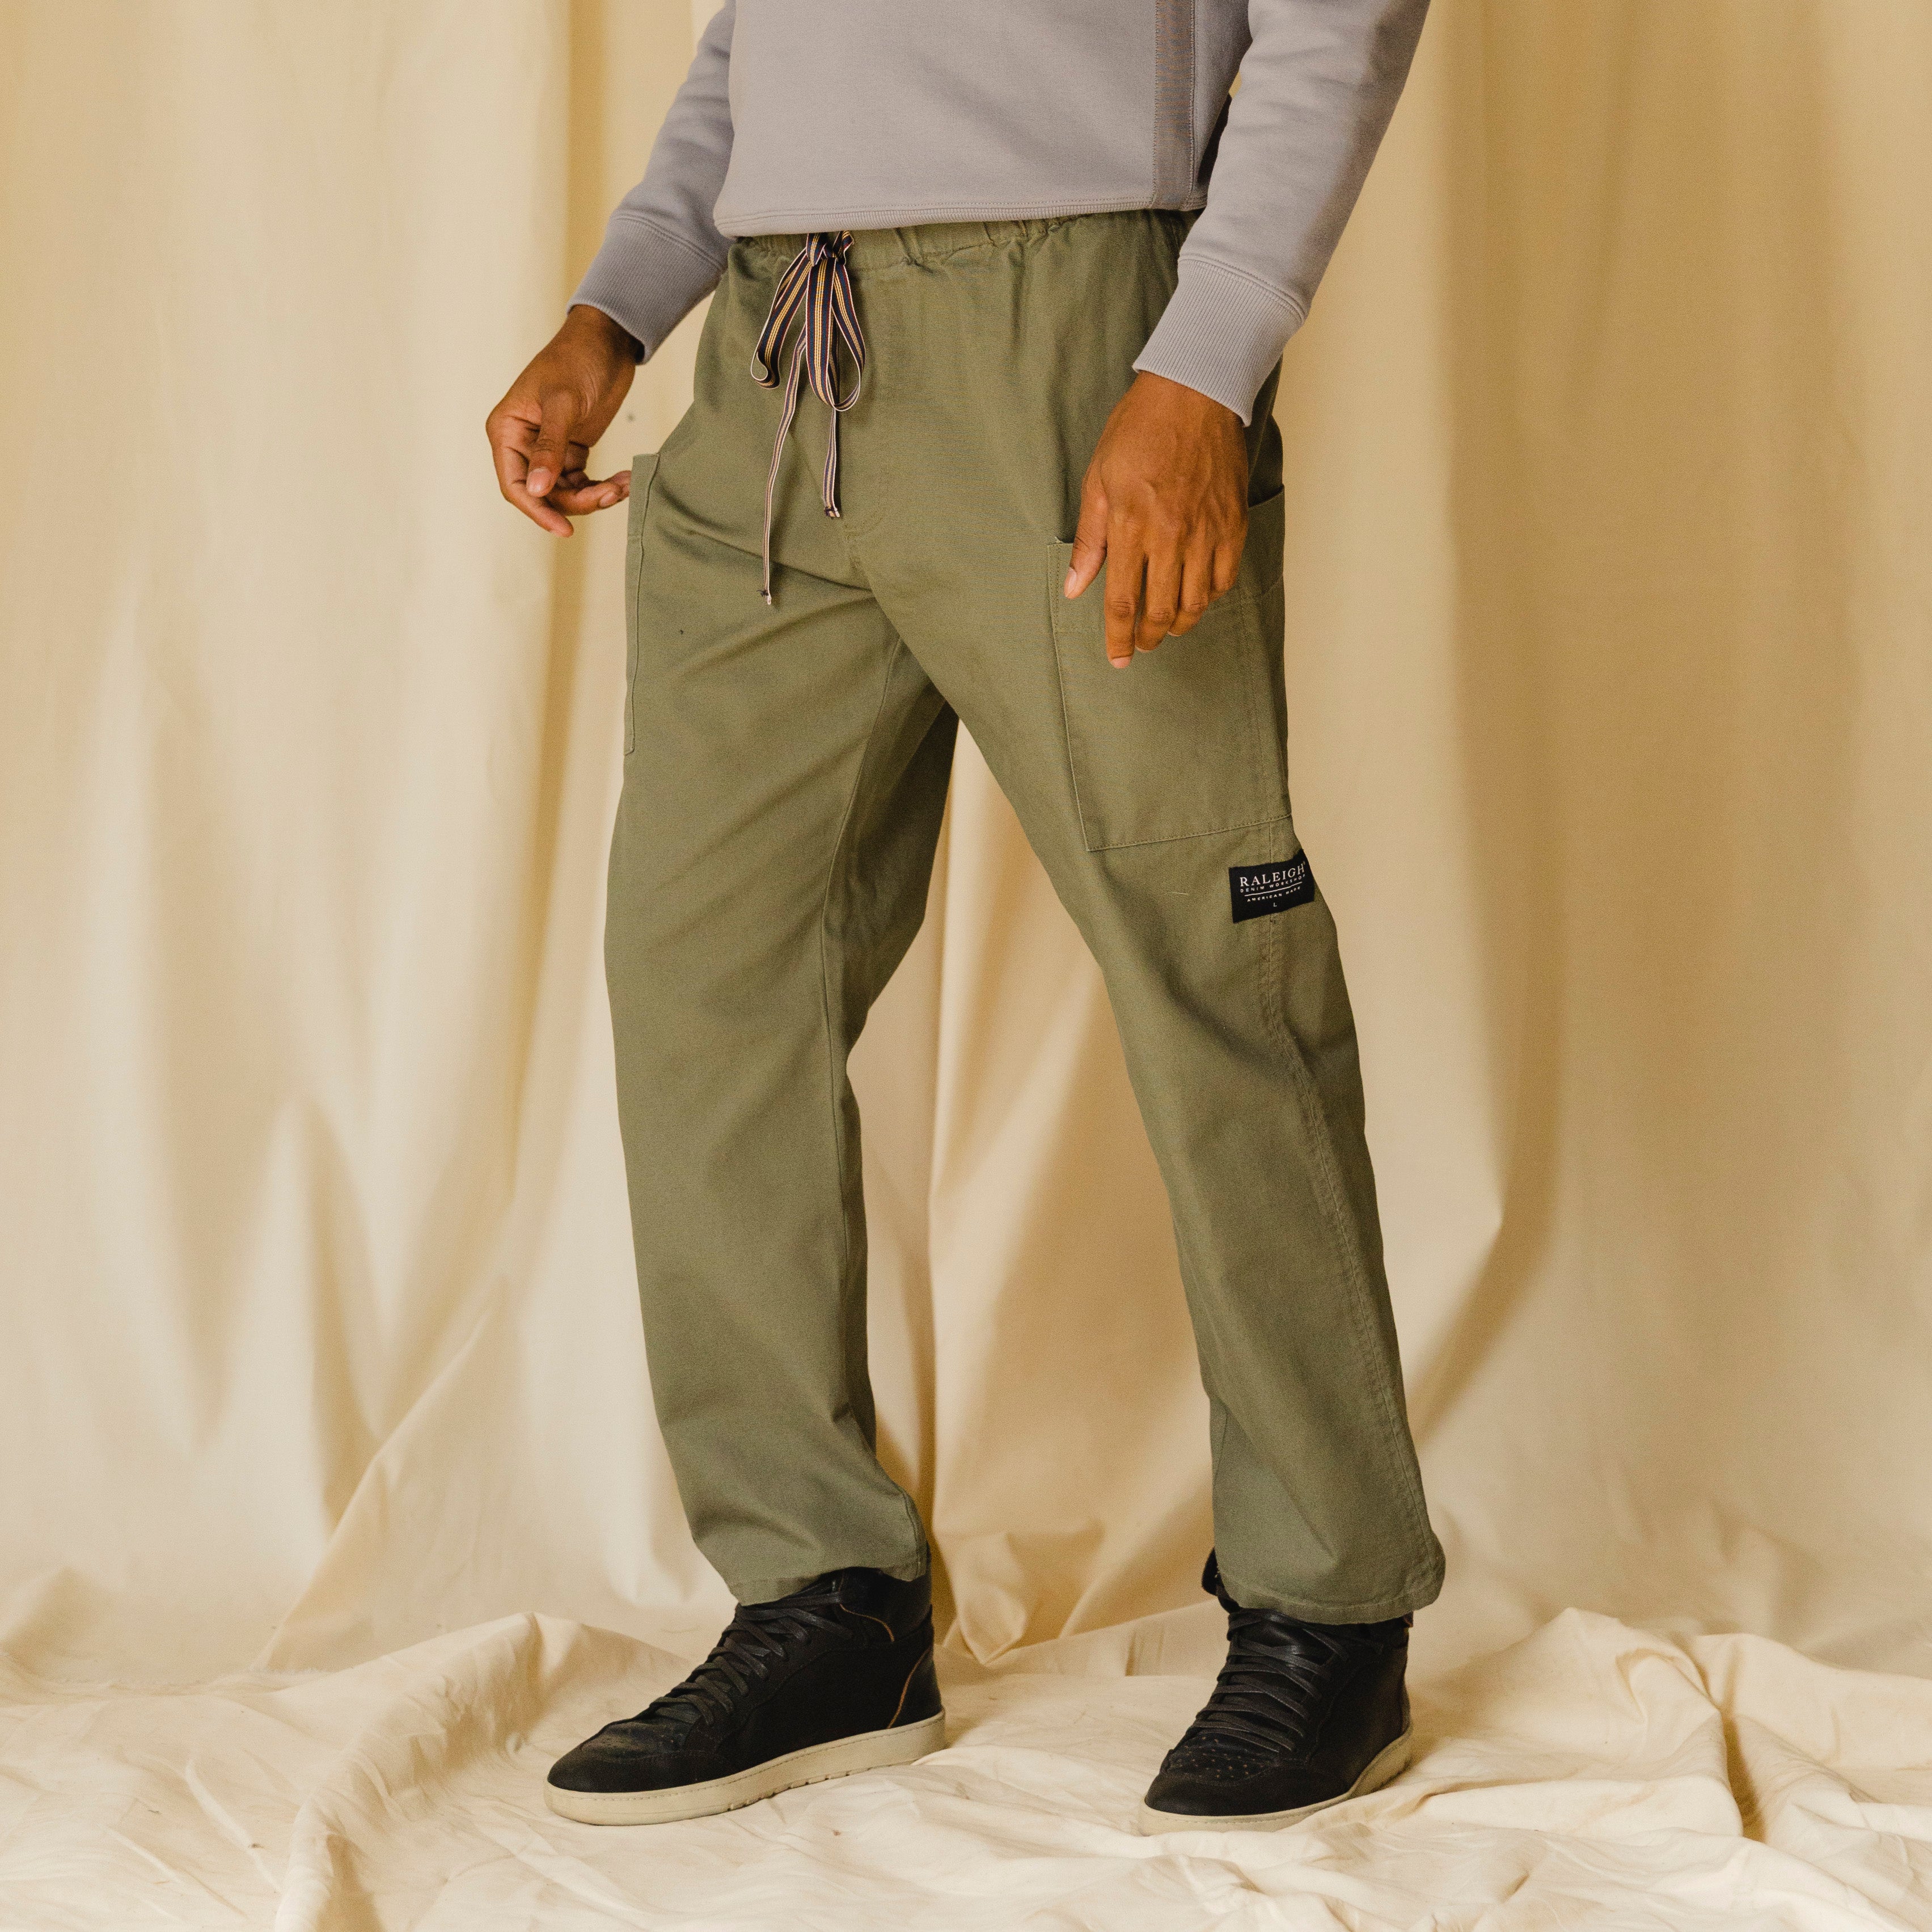 Shop Slim Fit Denim Cargo Pants with Pockets and Drawstring